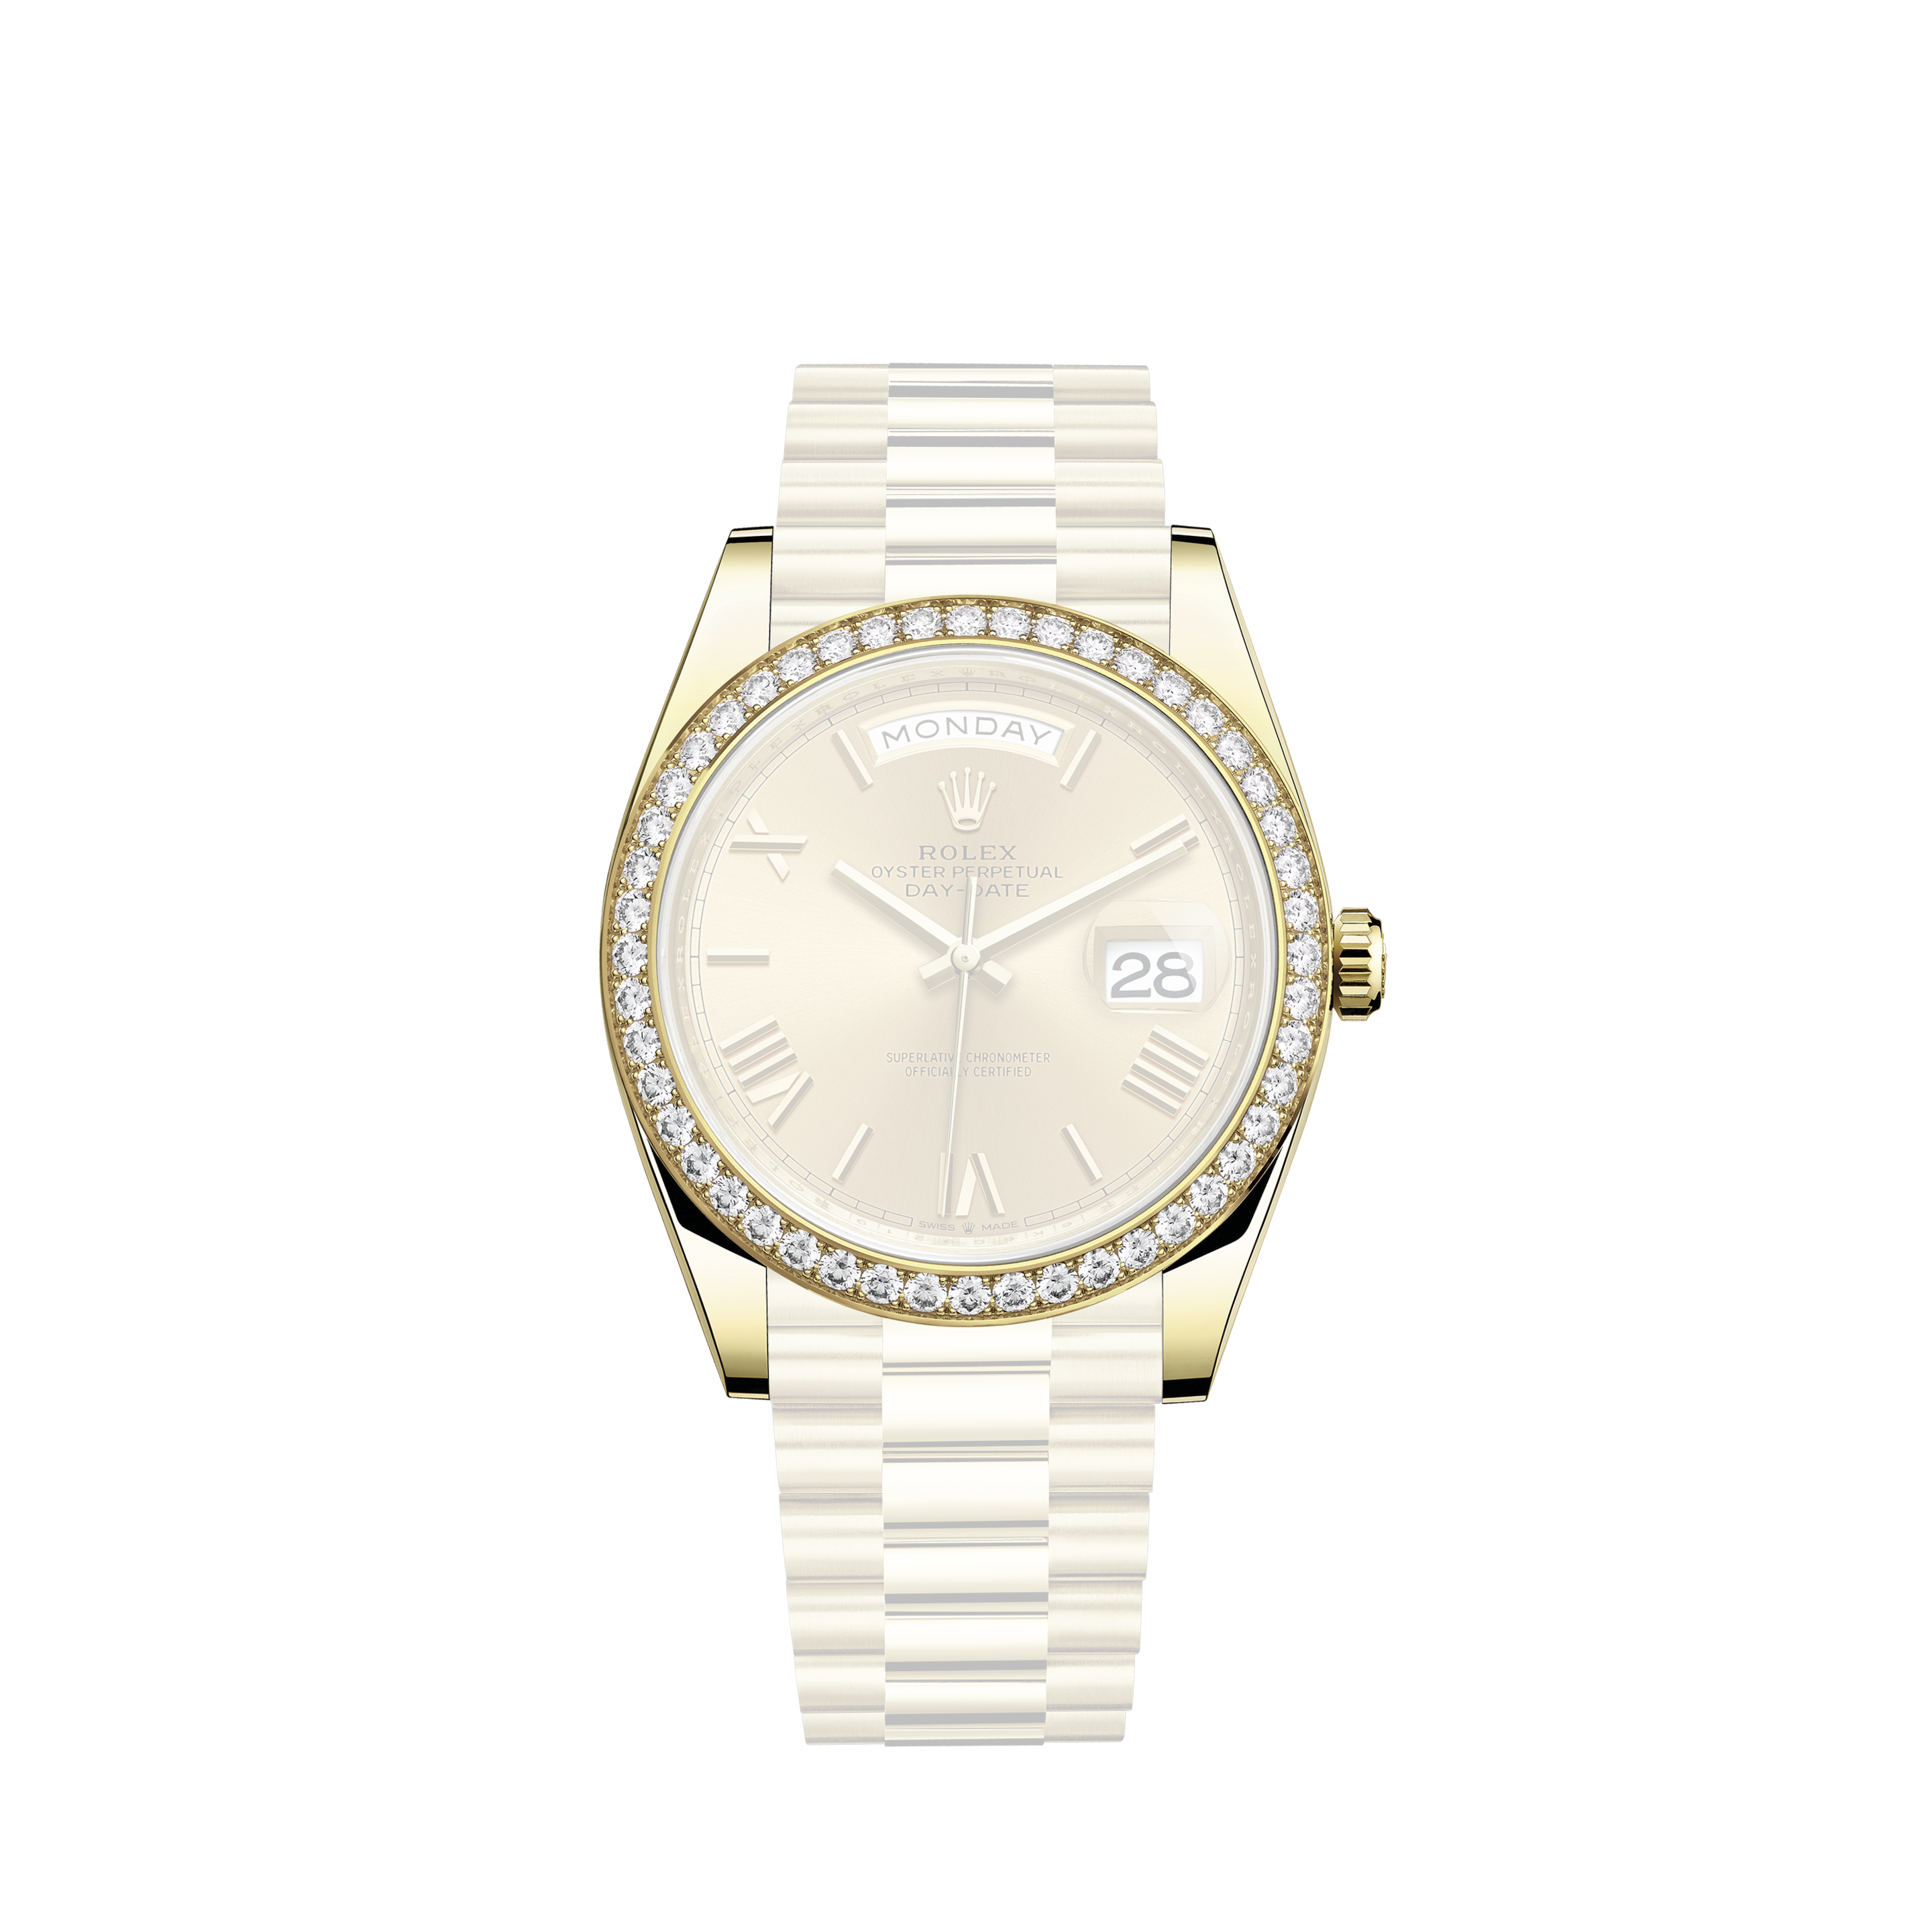 Rolex Day-Date 36 18K Gold Pavé Dial Diamanten Oyster Perpetual Ref. 18238